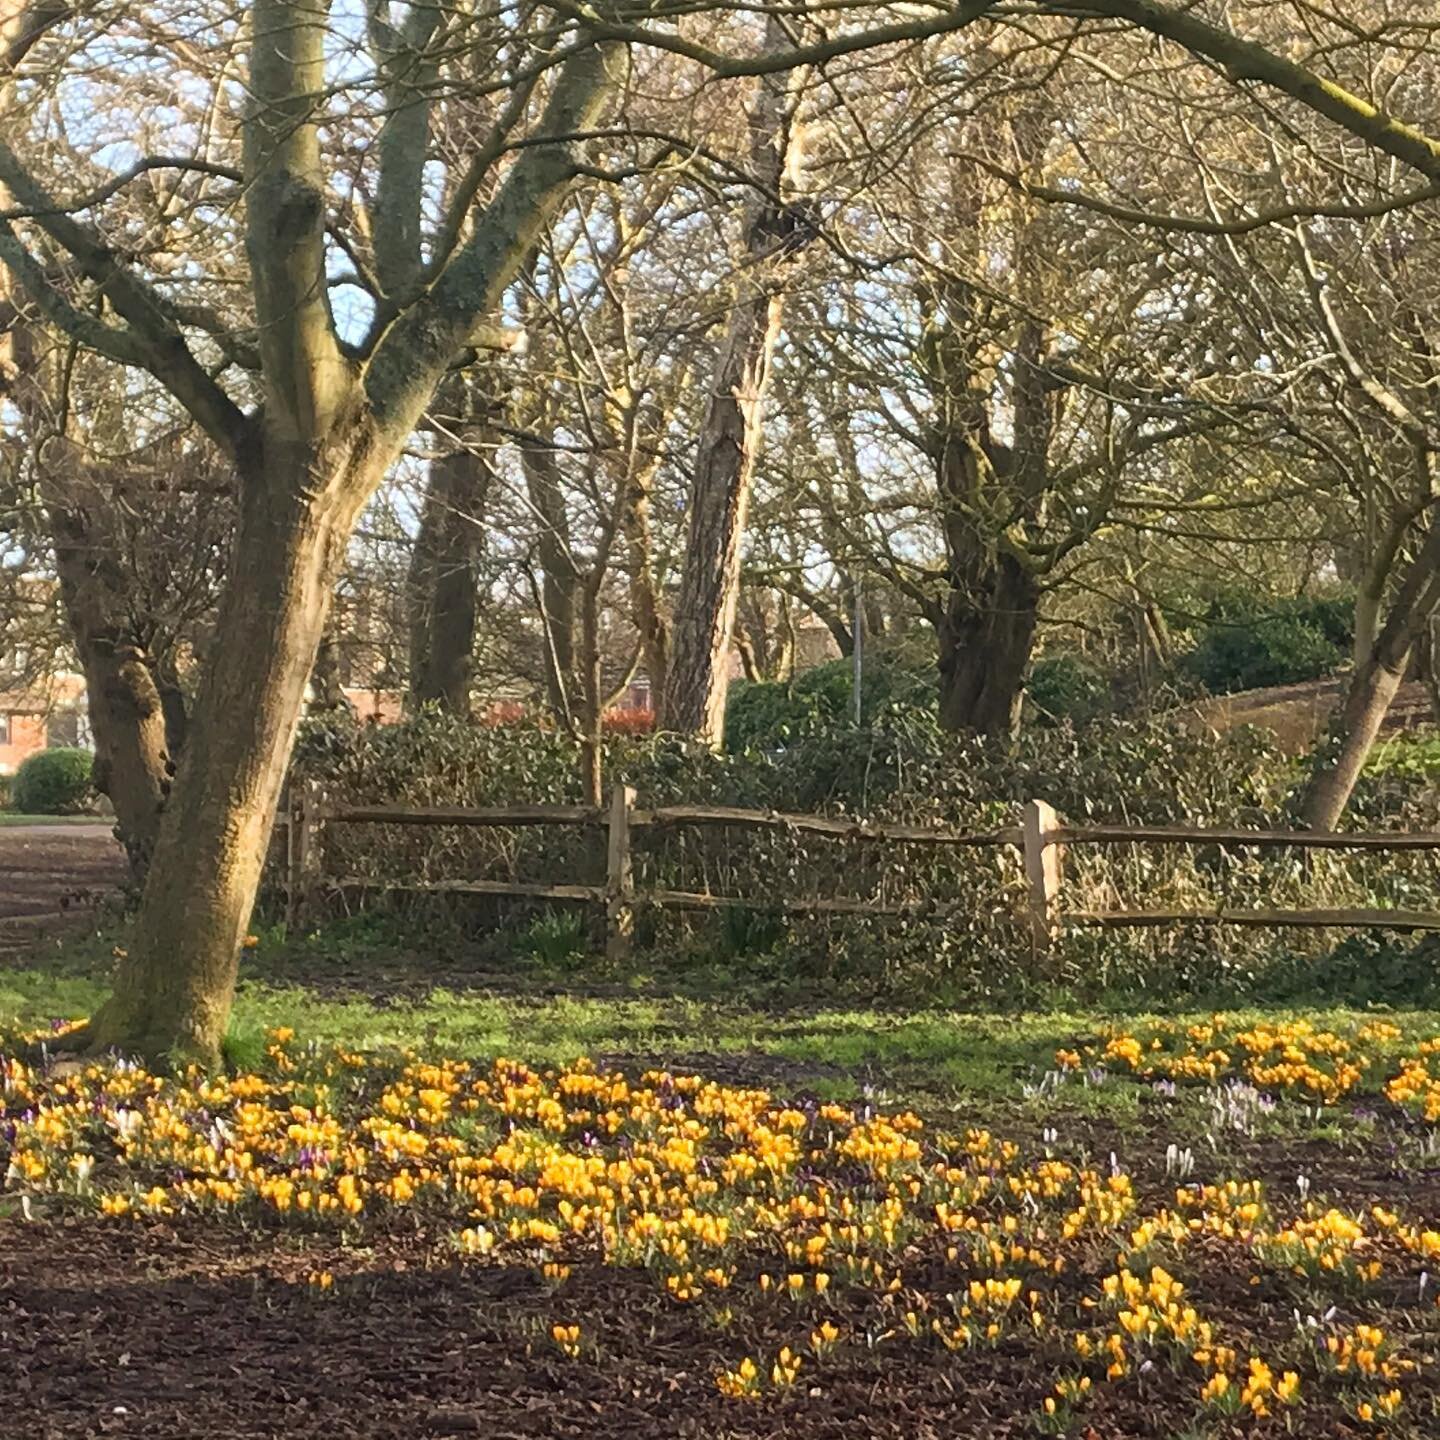 Carpets of unexpected colour &amp; leaves beginning to unfurl on the trees today 💛 spring is here!